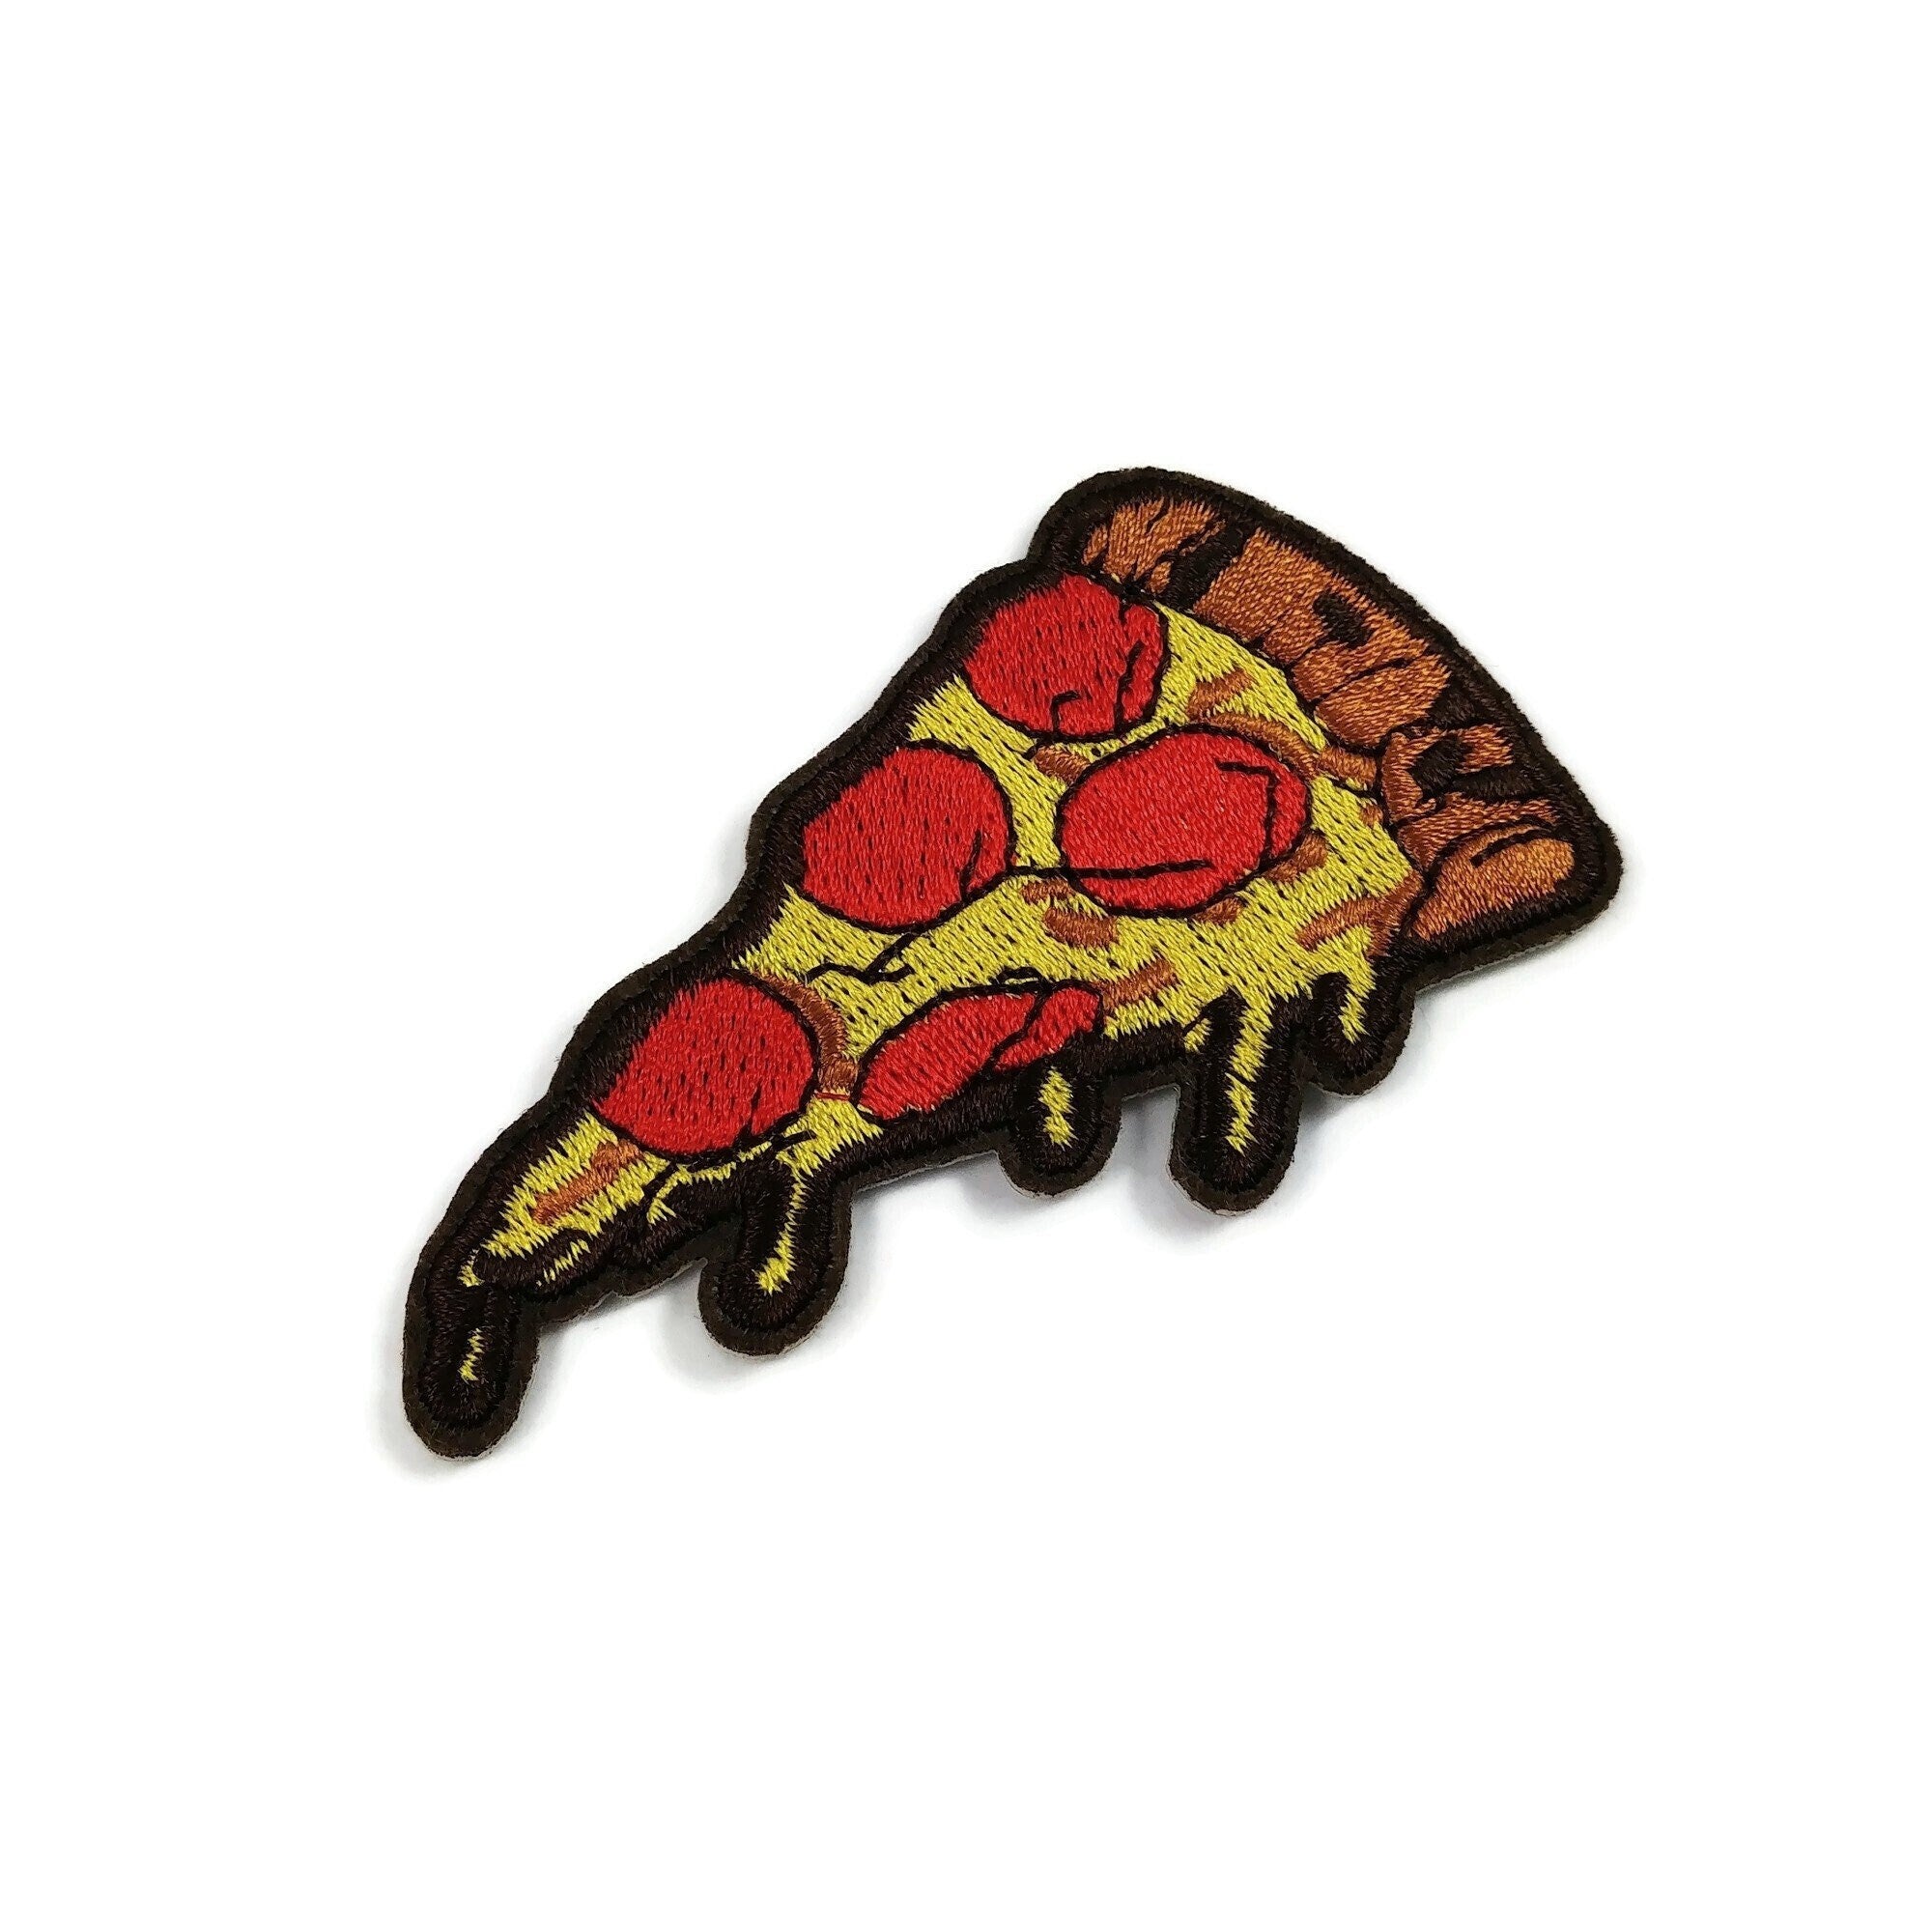 Pizza embroidered iron on patch, Food lover sew on patch, Fun applique